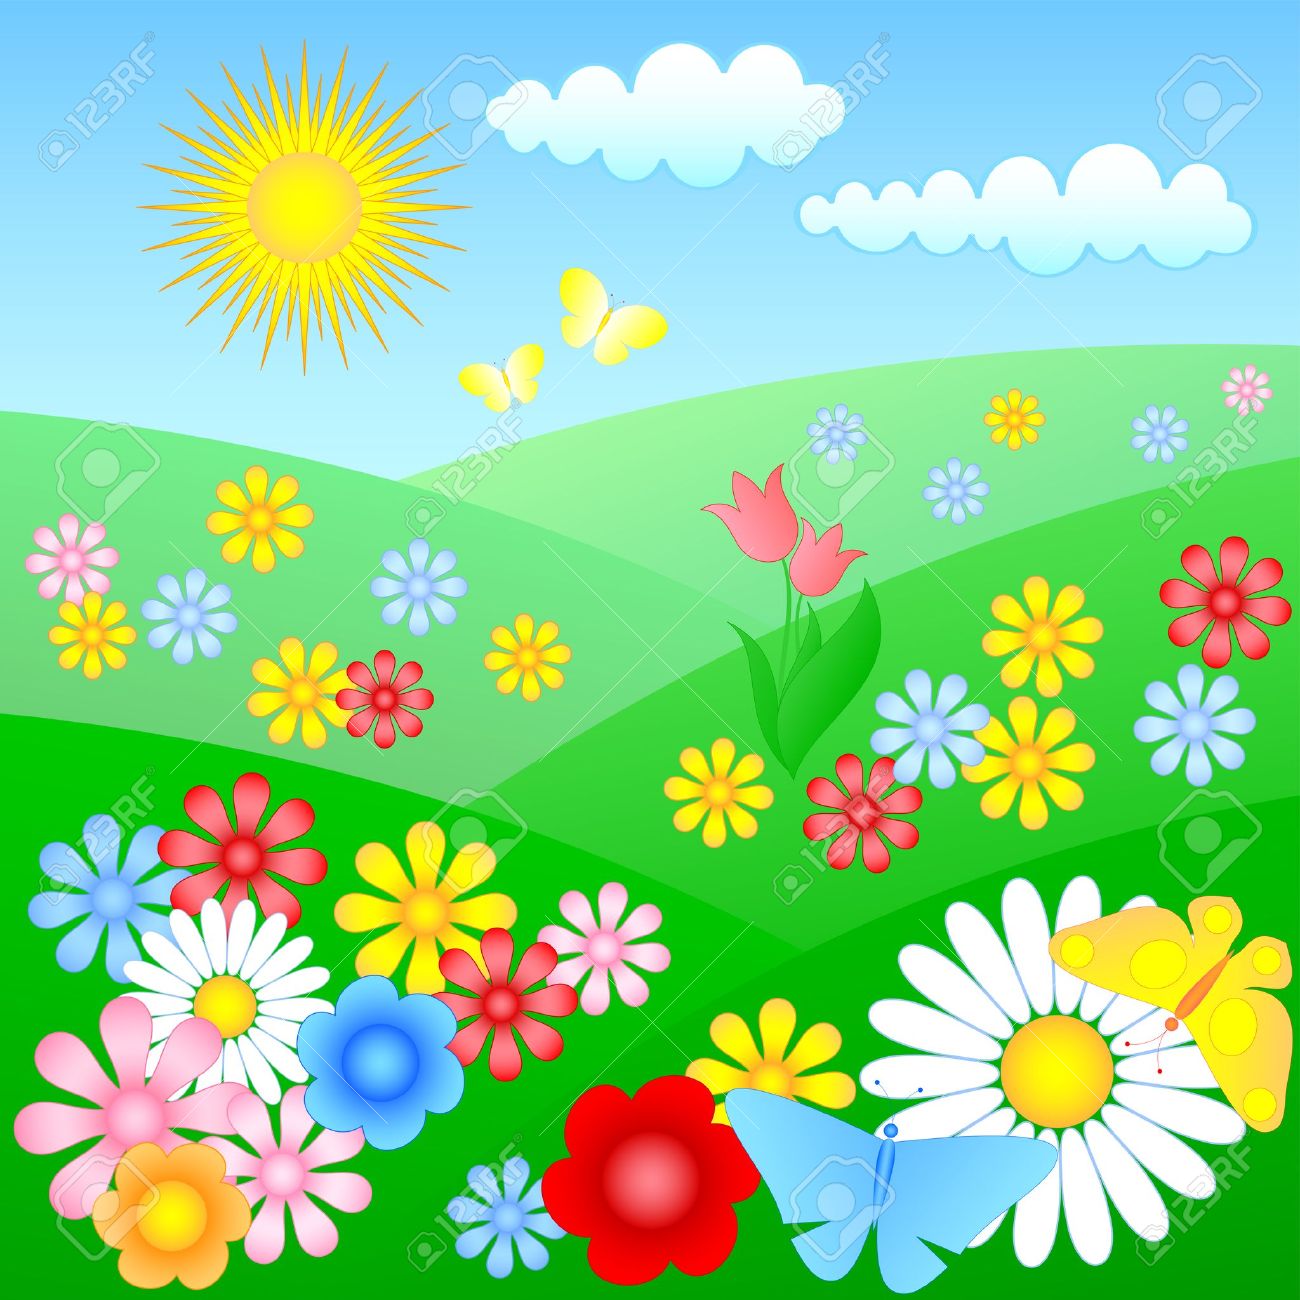 flower meadow clipart - photo #27